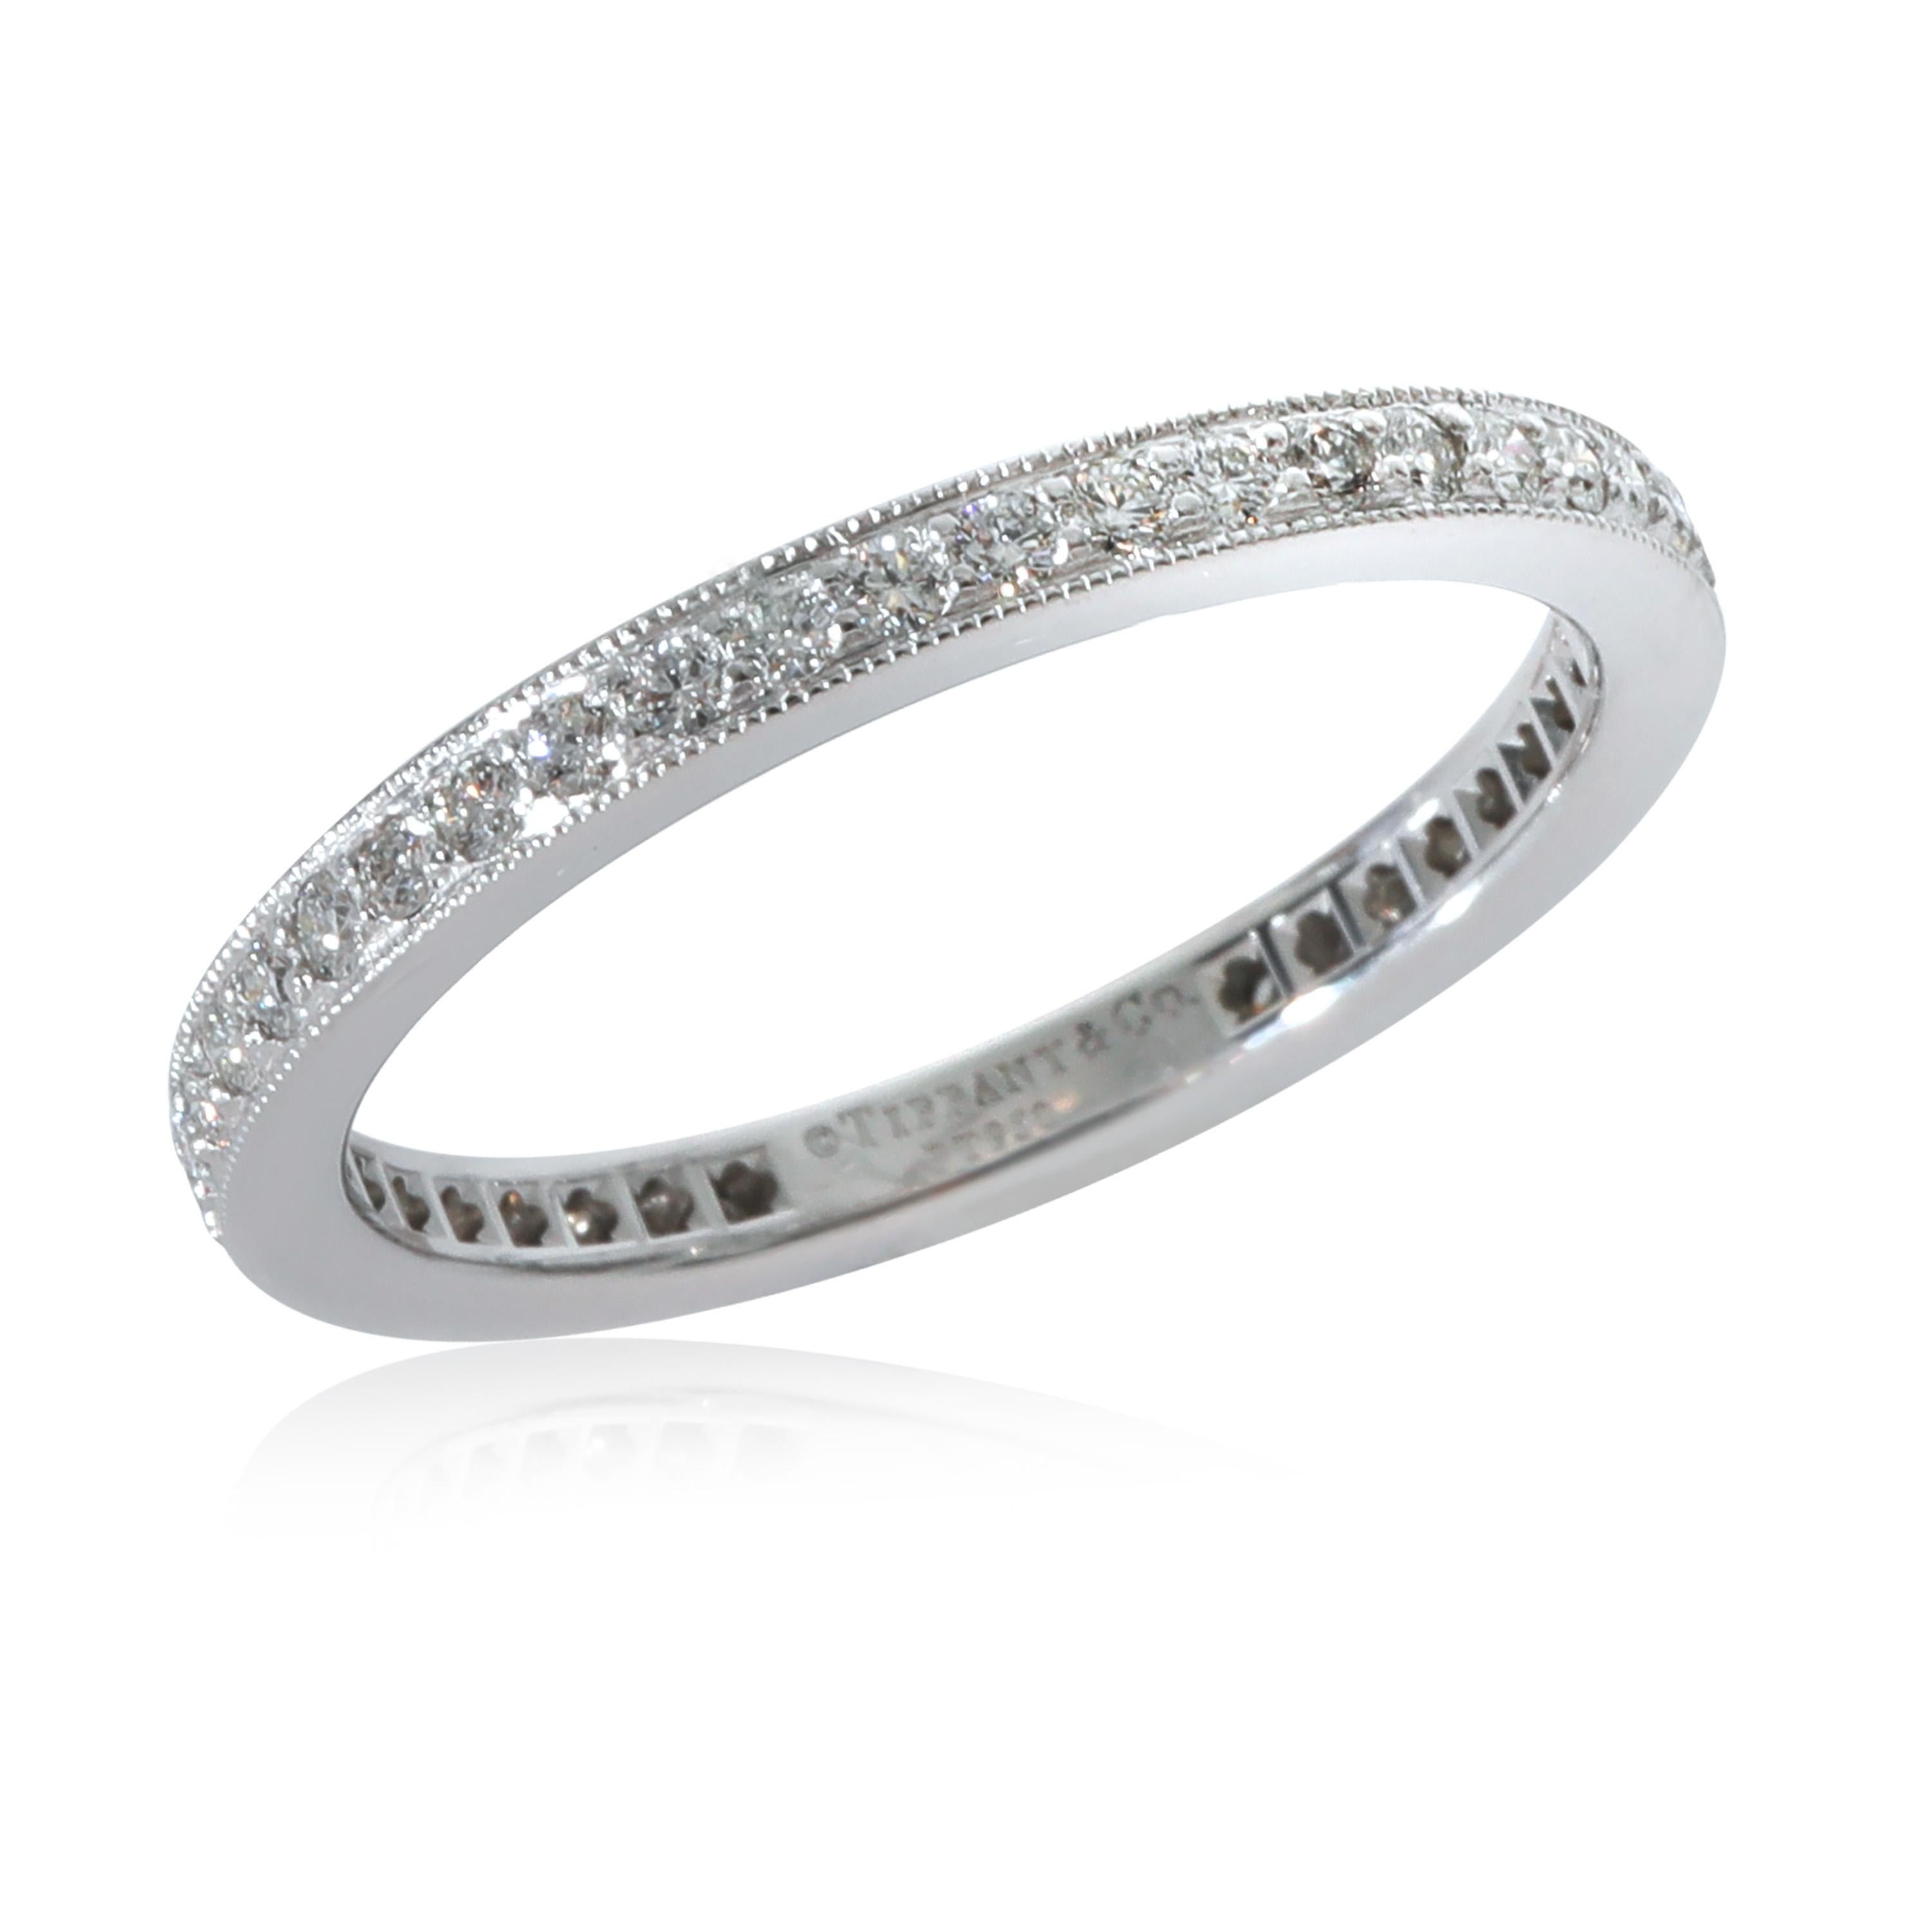 Women's or Men's Tiffany & Co. Tiffany Together Diamond Eternity Band in Platinum 0.36 Ctw